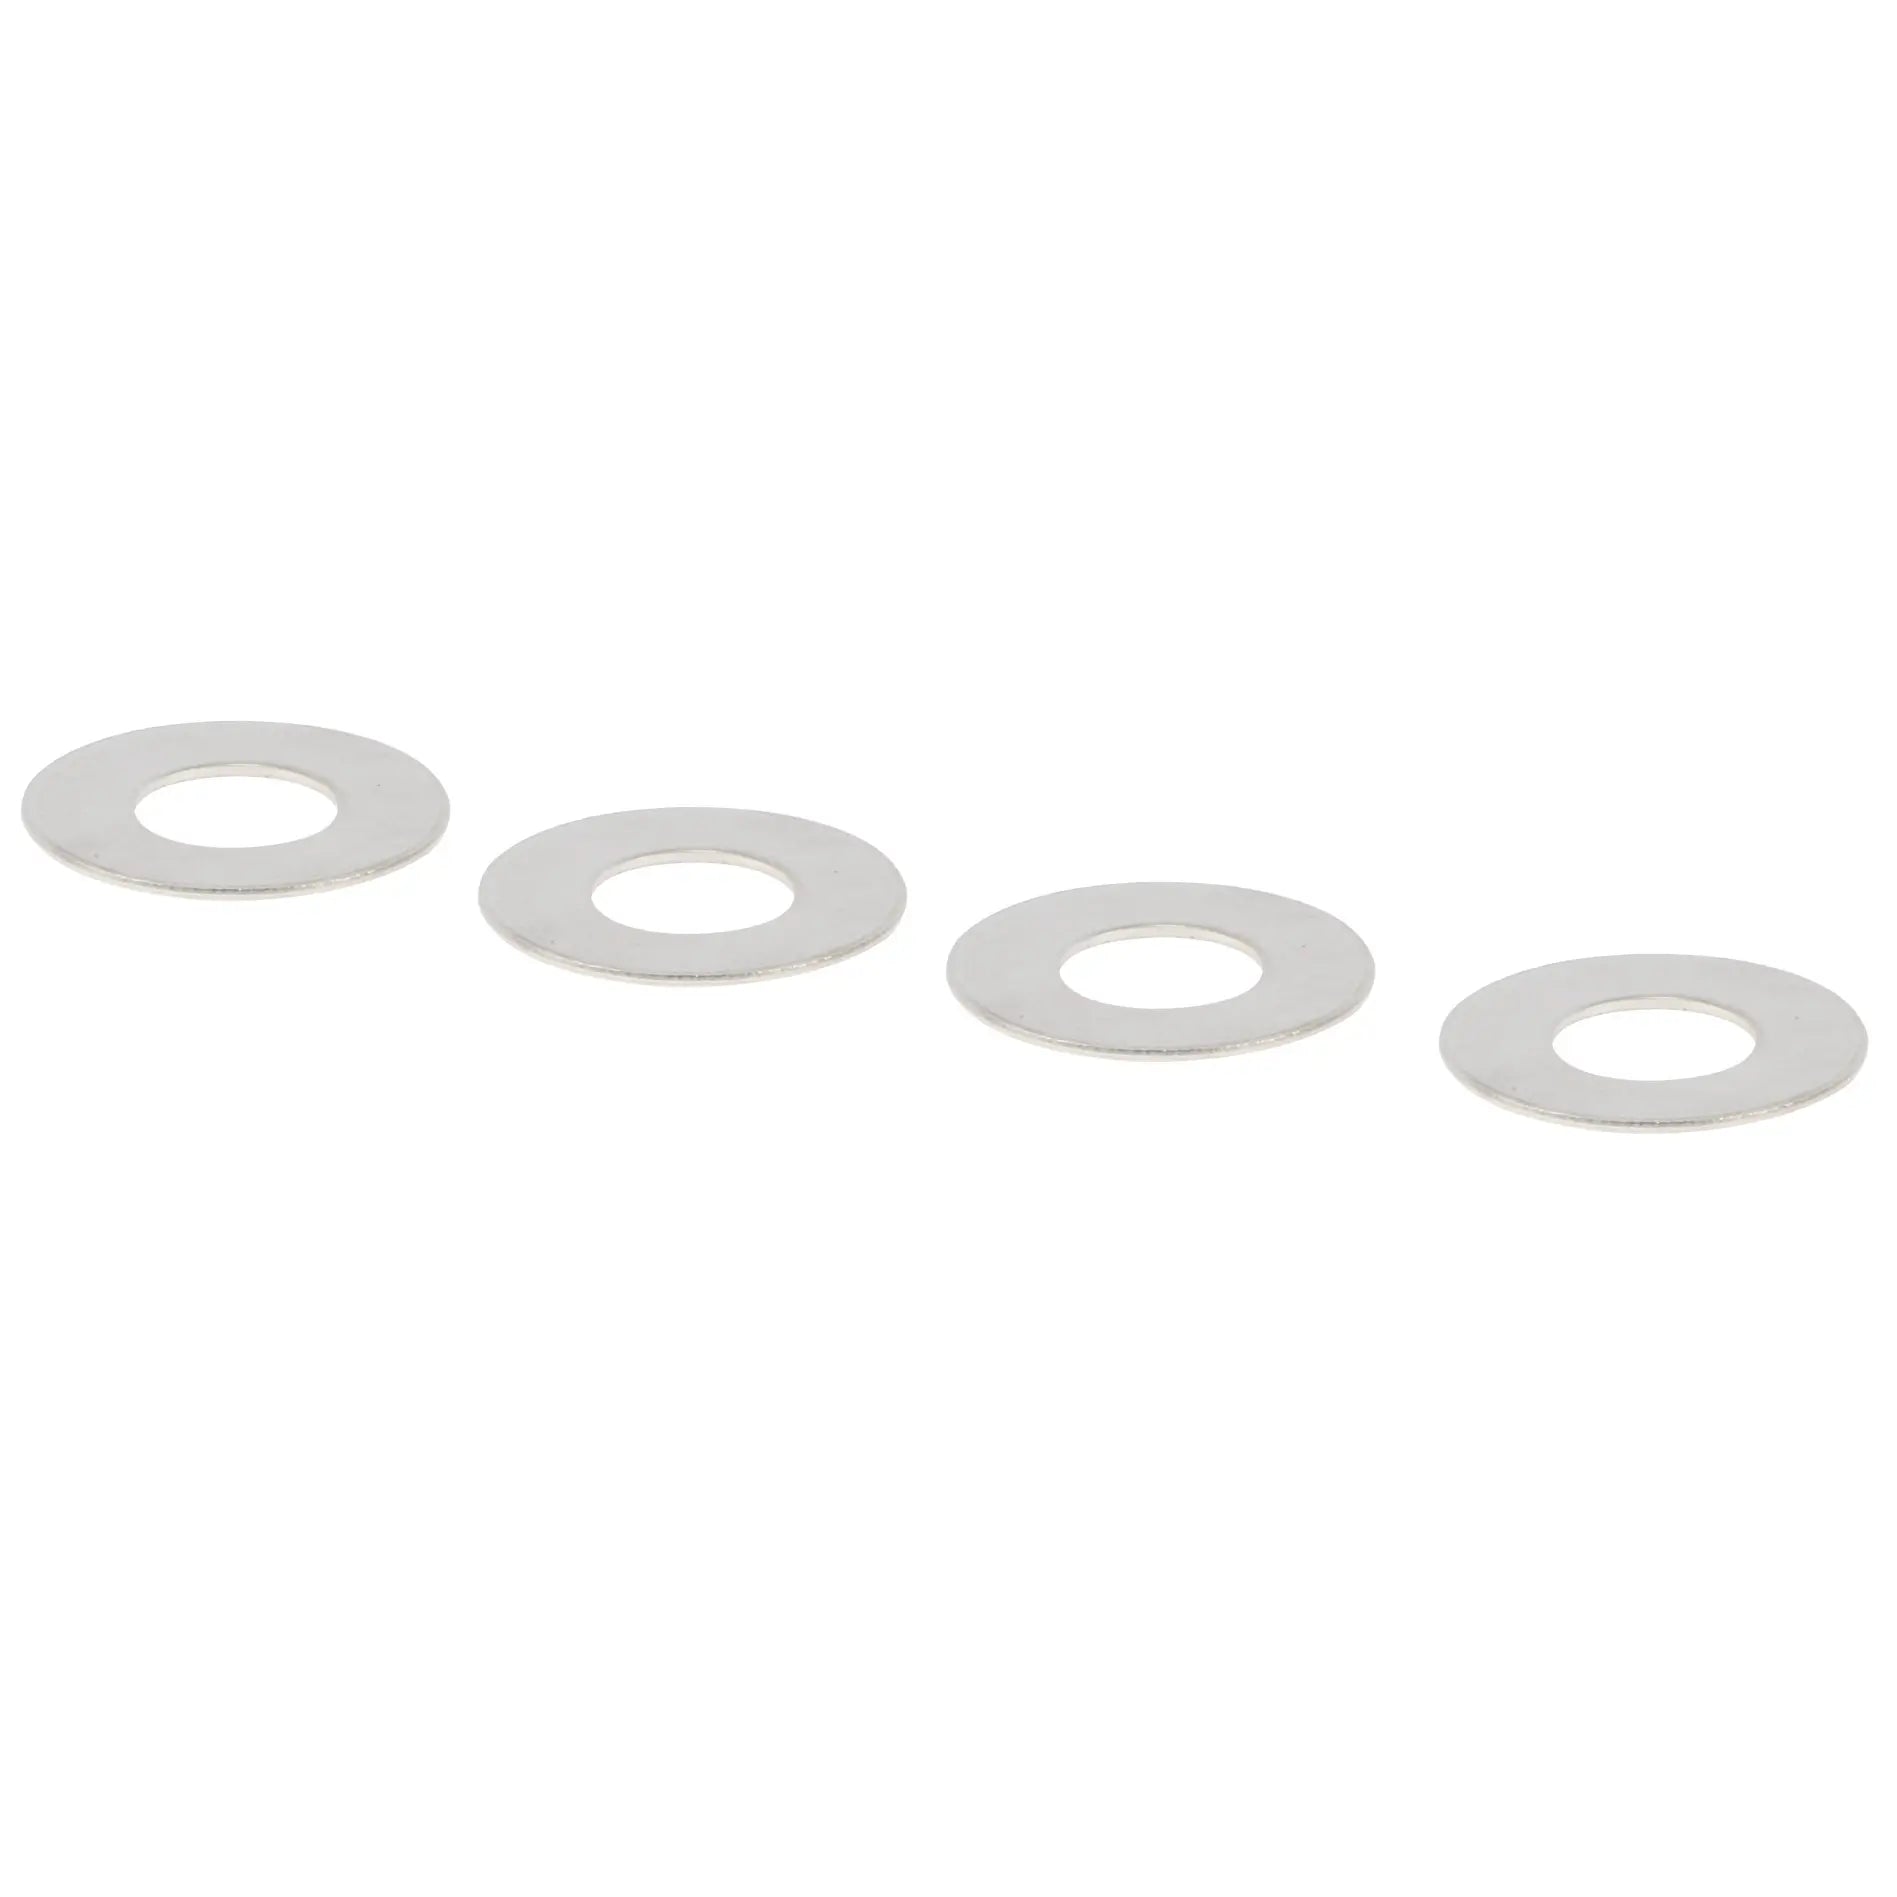 Replacement washers for bosch slicer shredder attachment